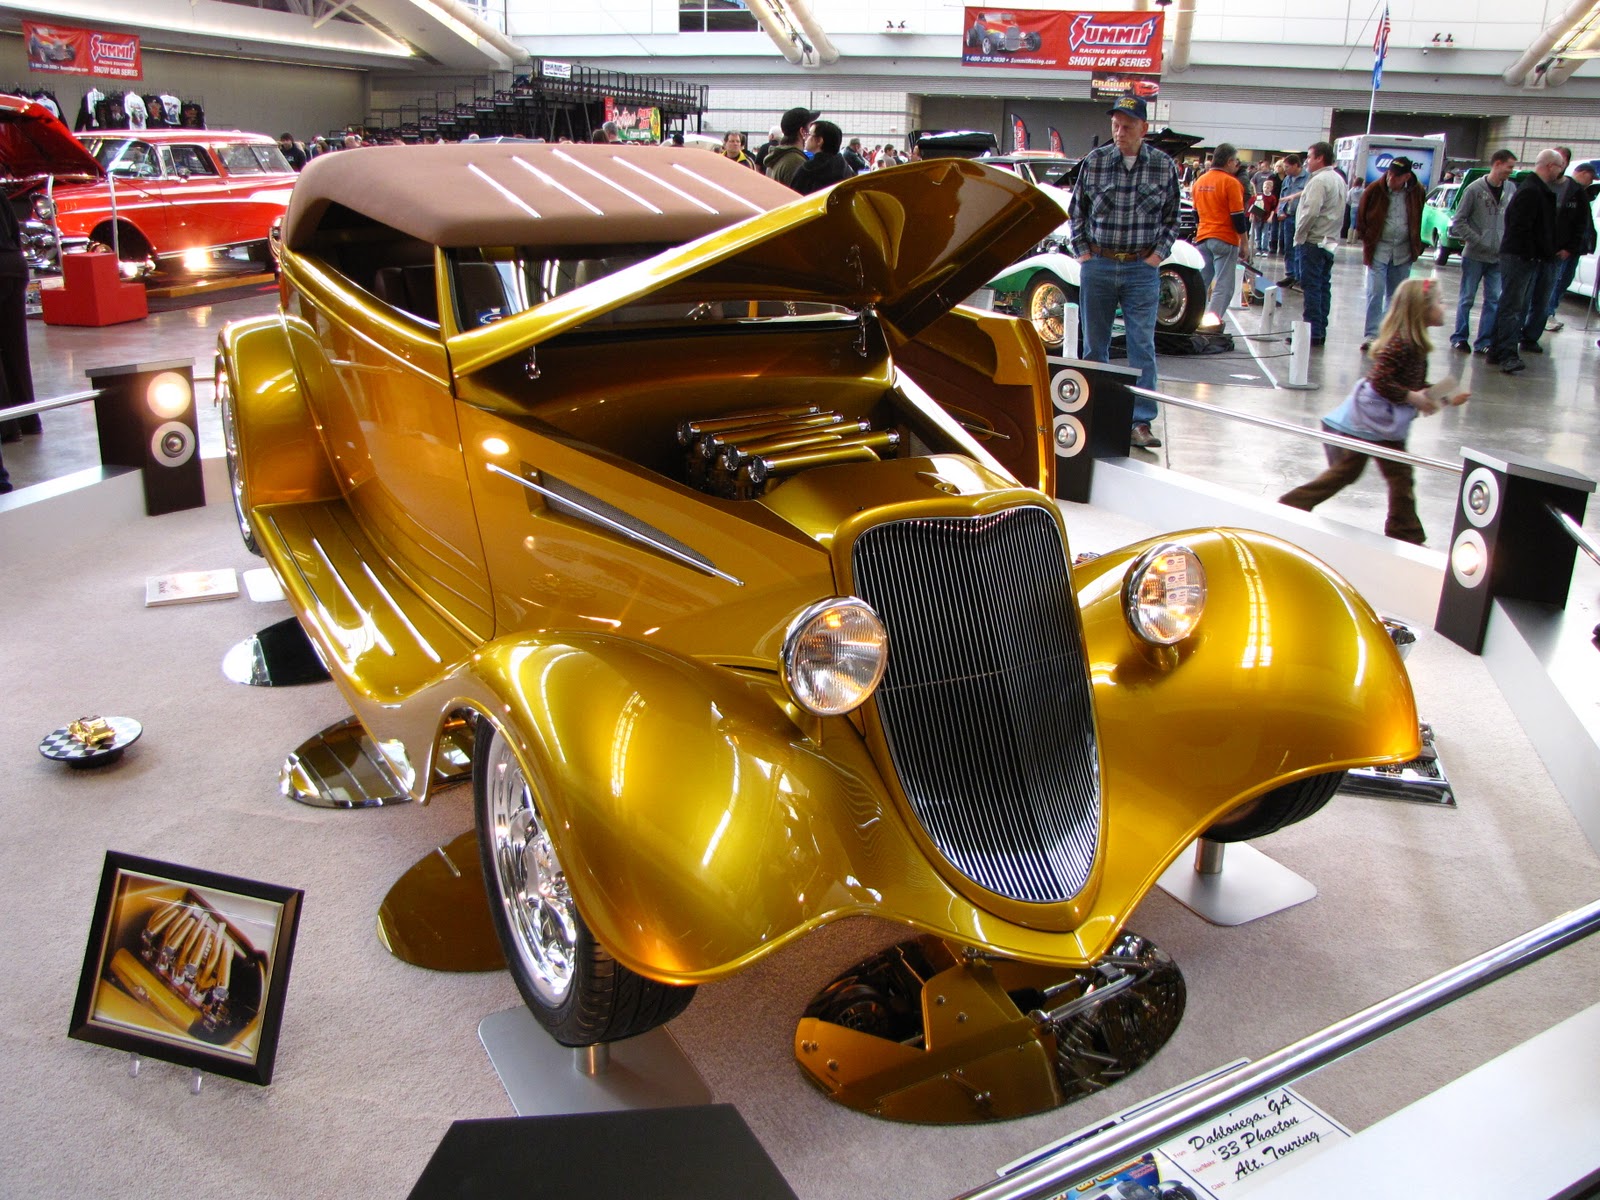 Picks from the Pittsburgh World of Wheels Round 1